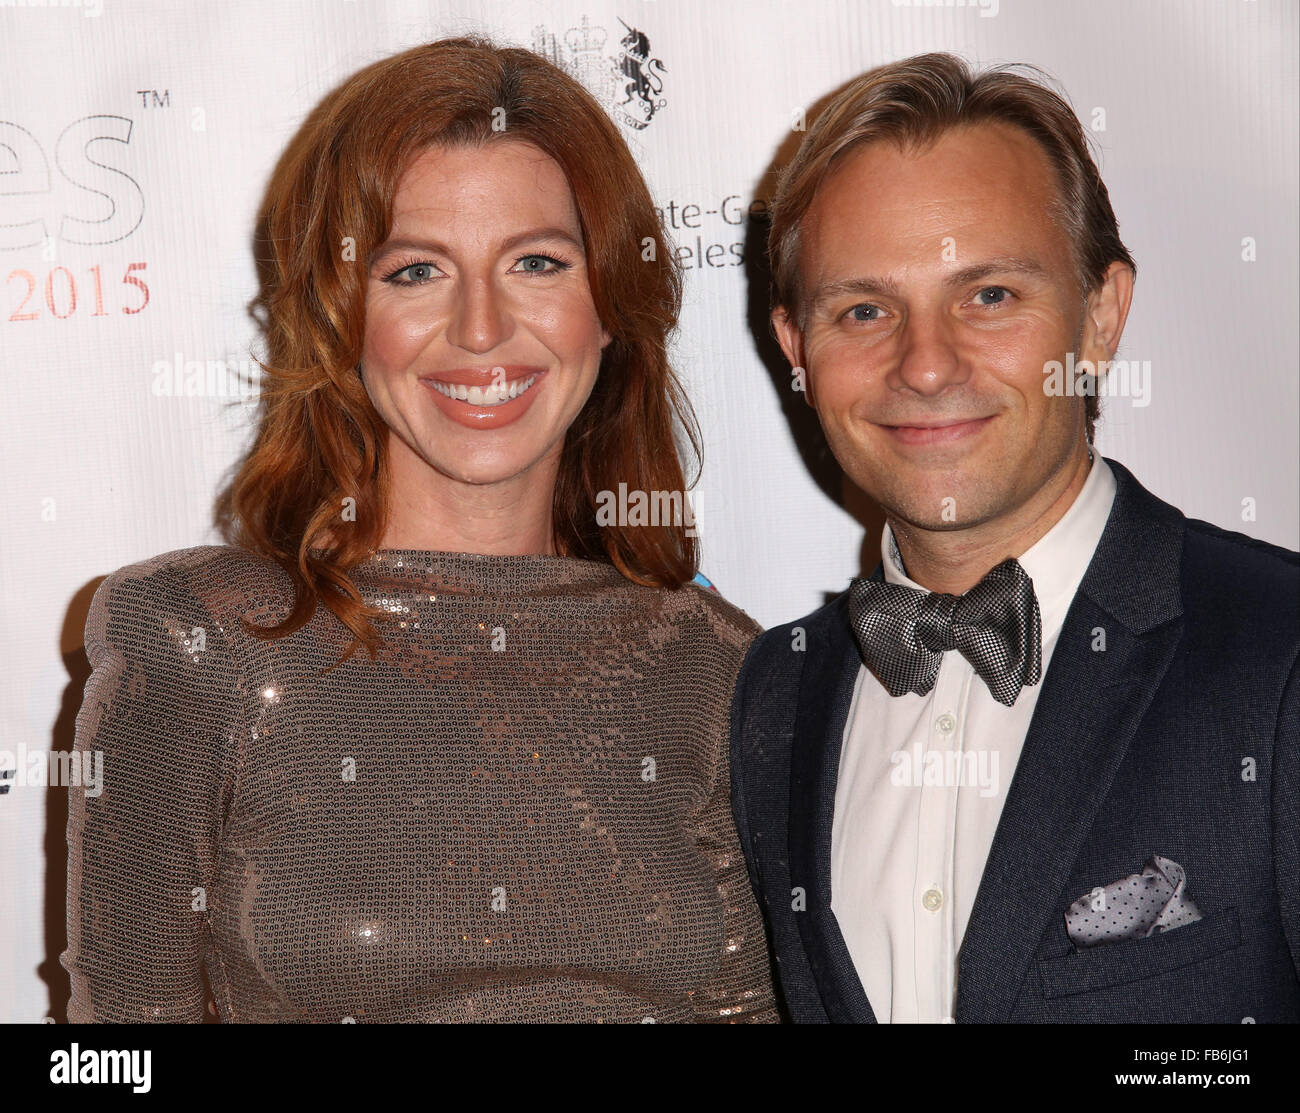 Celebrities attend UKares Awards presented by UKares Foundation and Brits in LA at home of the British Consulate-General Los Angeles.  Featuring: Tanna Frederick, Craig Young Where: Los Angeles, California, United States When: 10 Dec 2015 Stock Photo